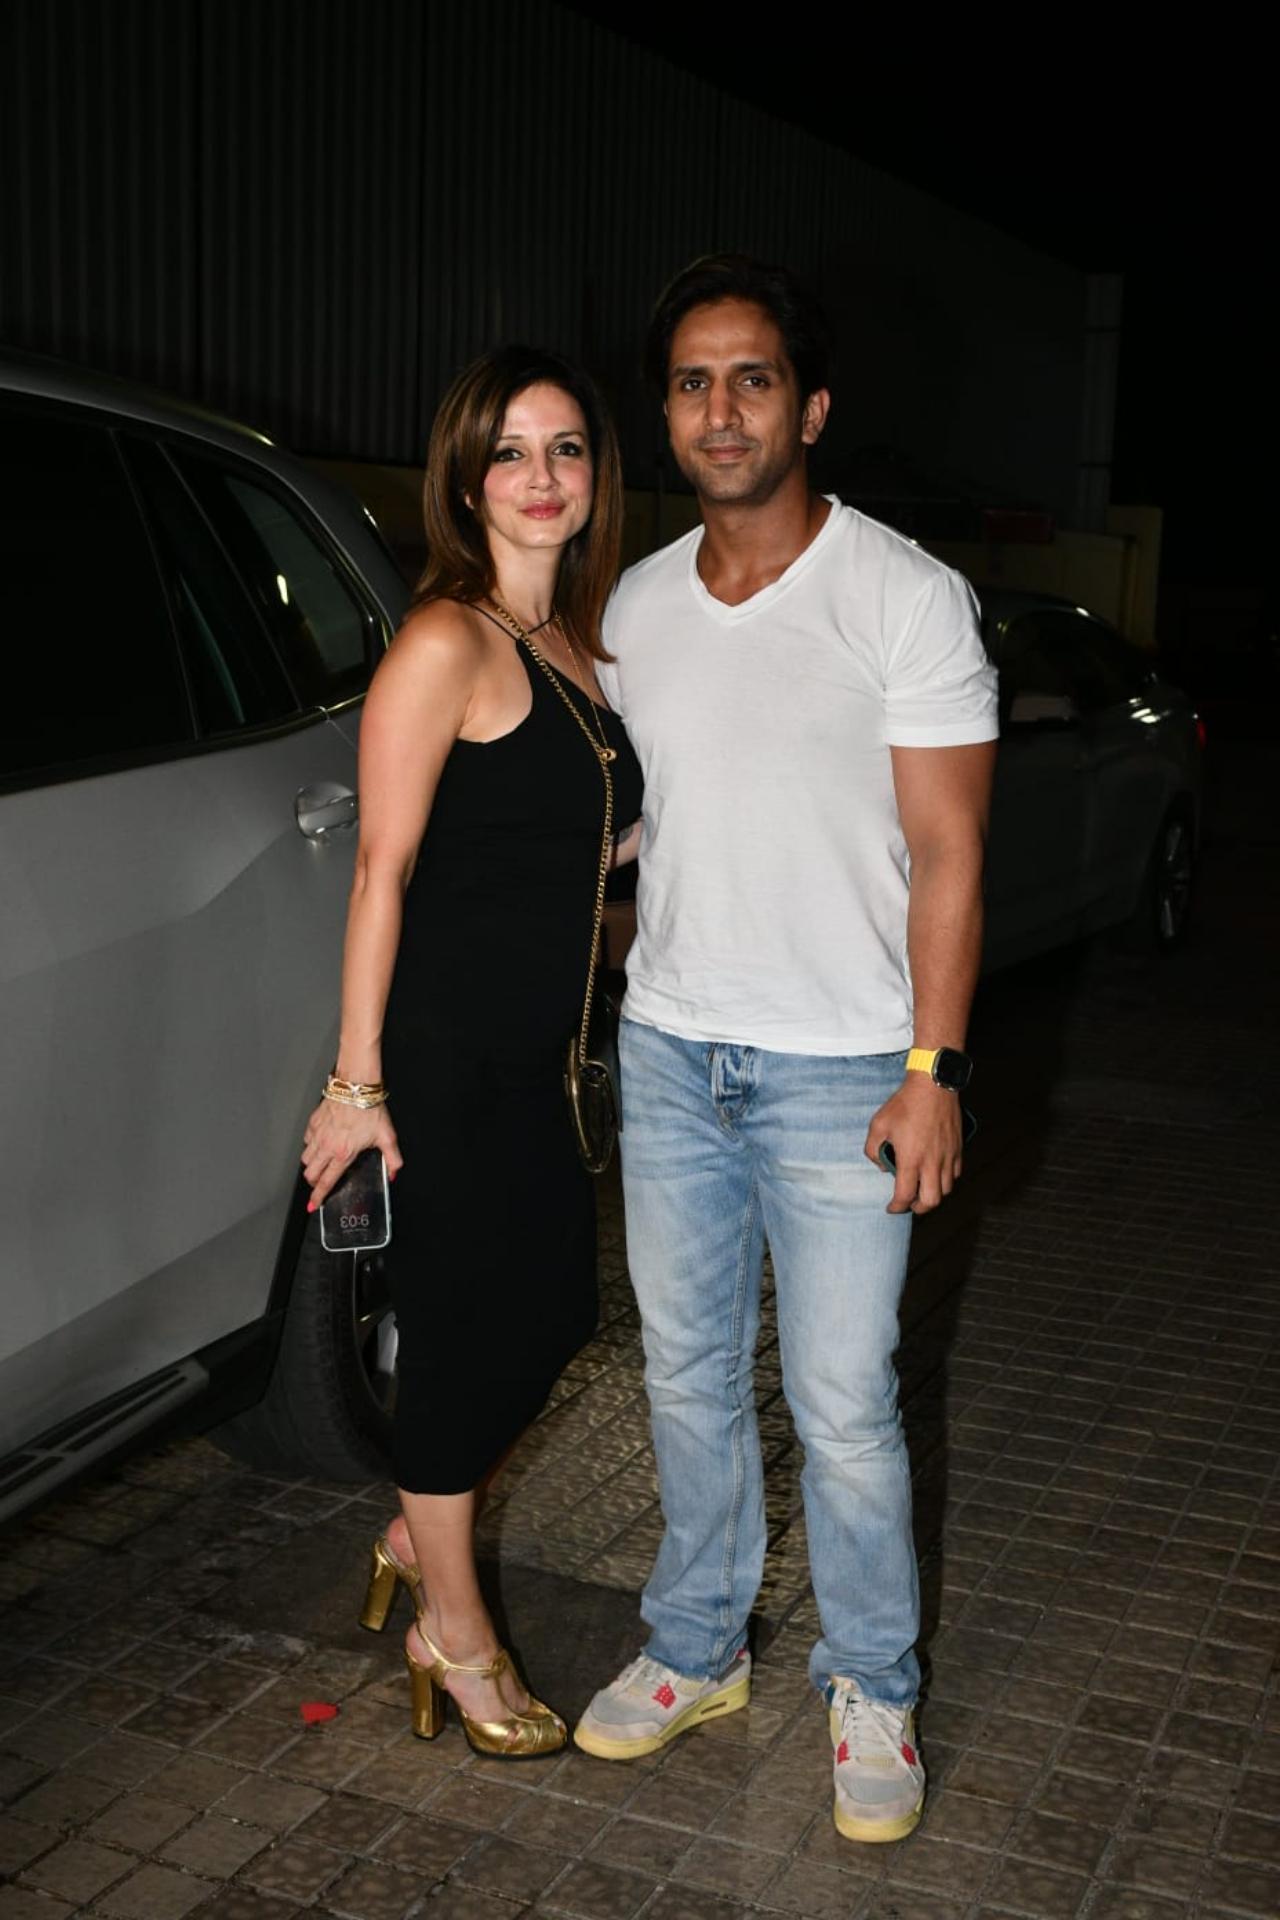 Sussanne Khan along with boyfrien Arslan Goni also attended the screening of the film in the city